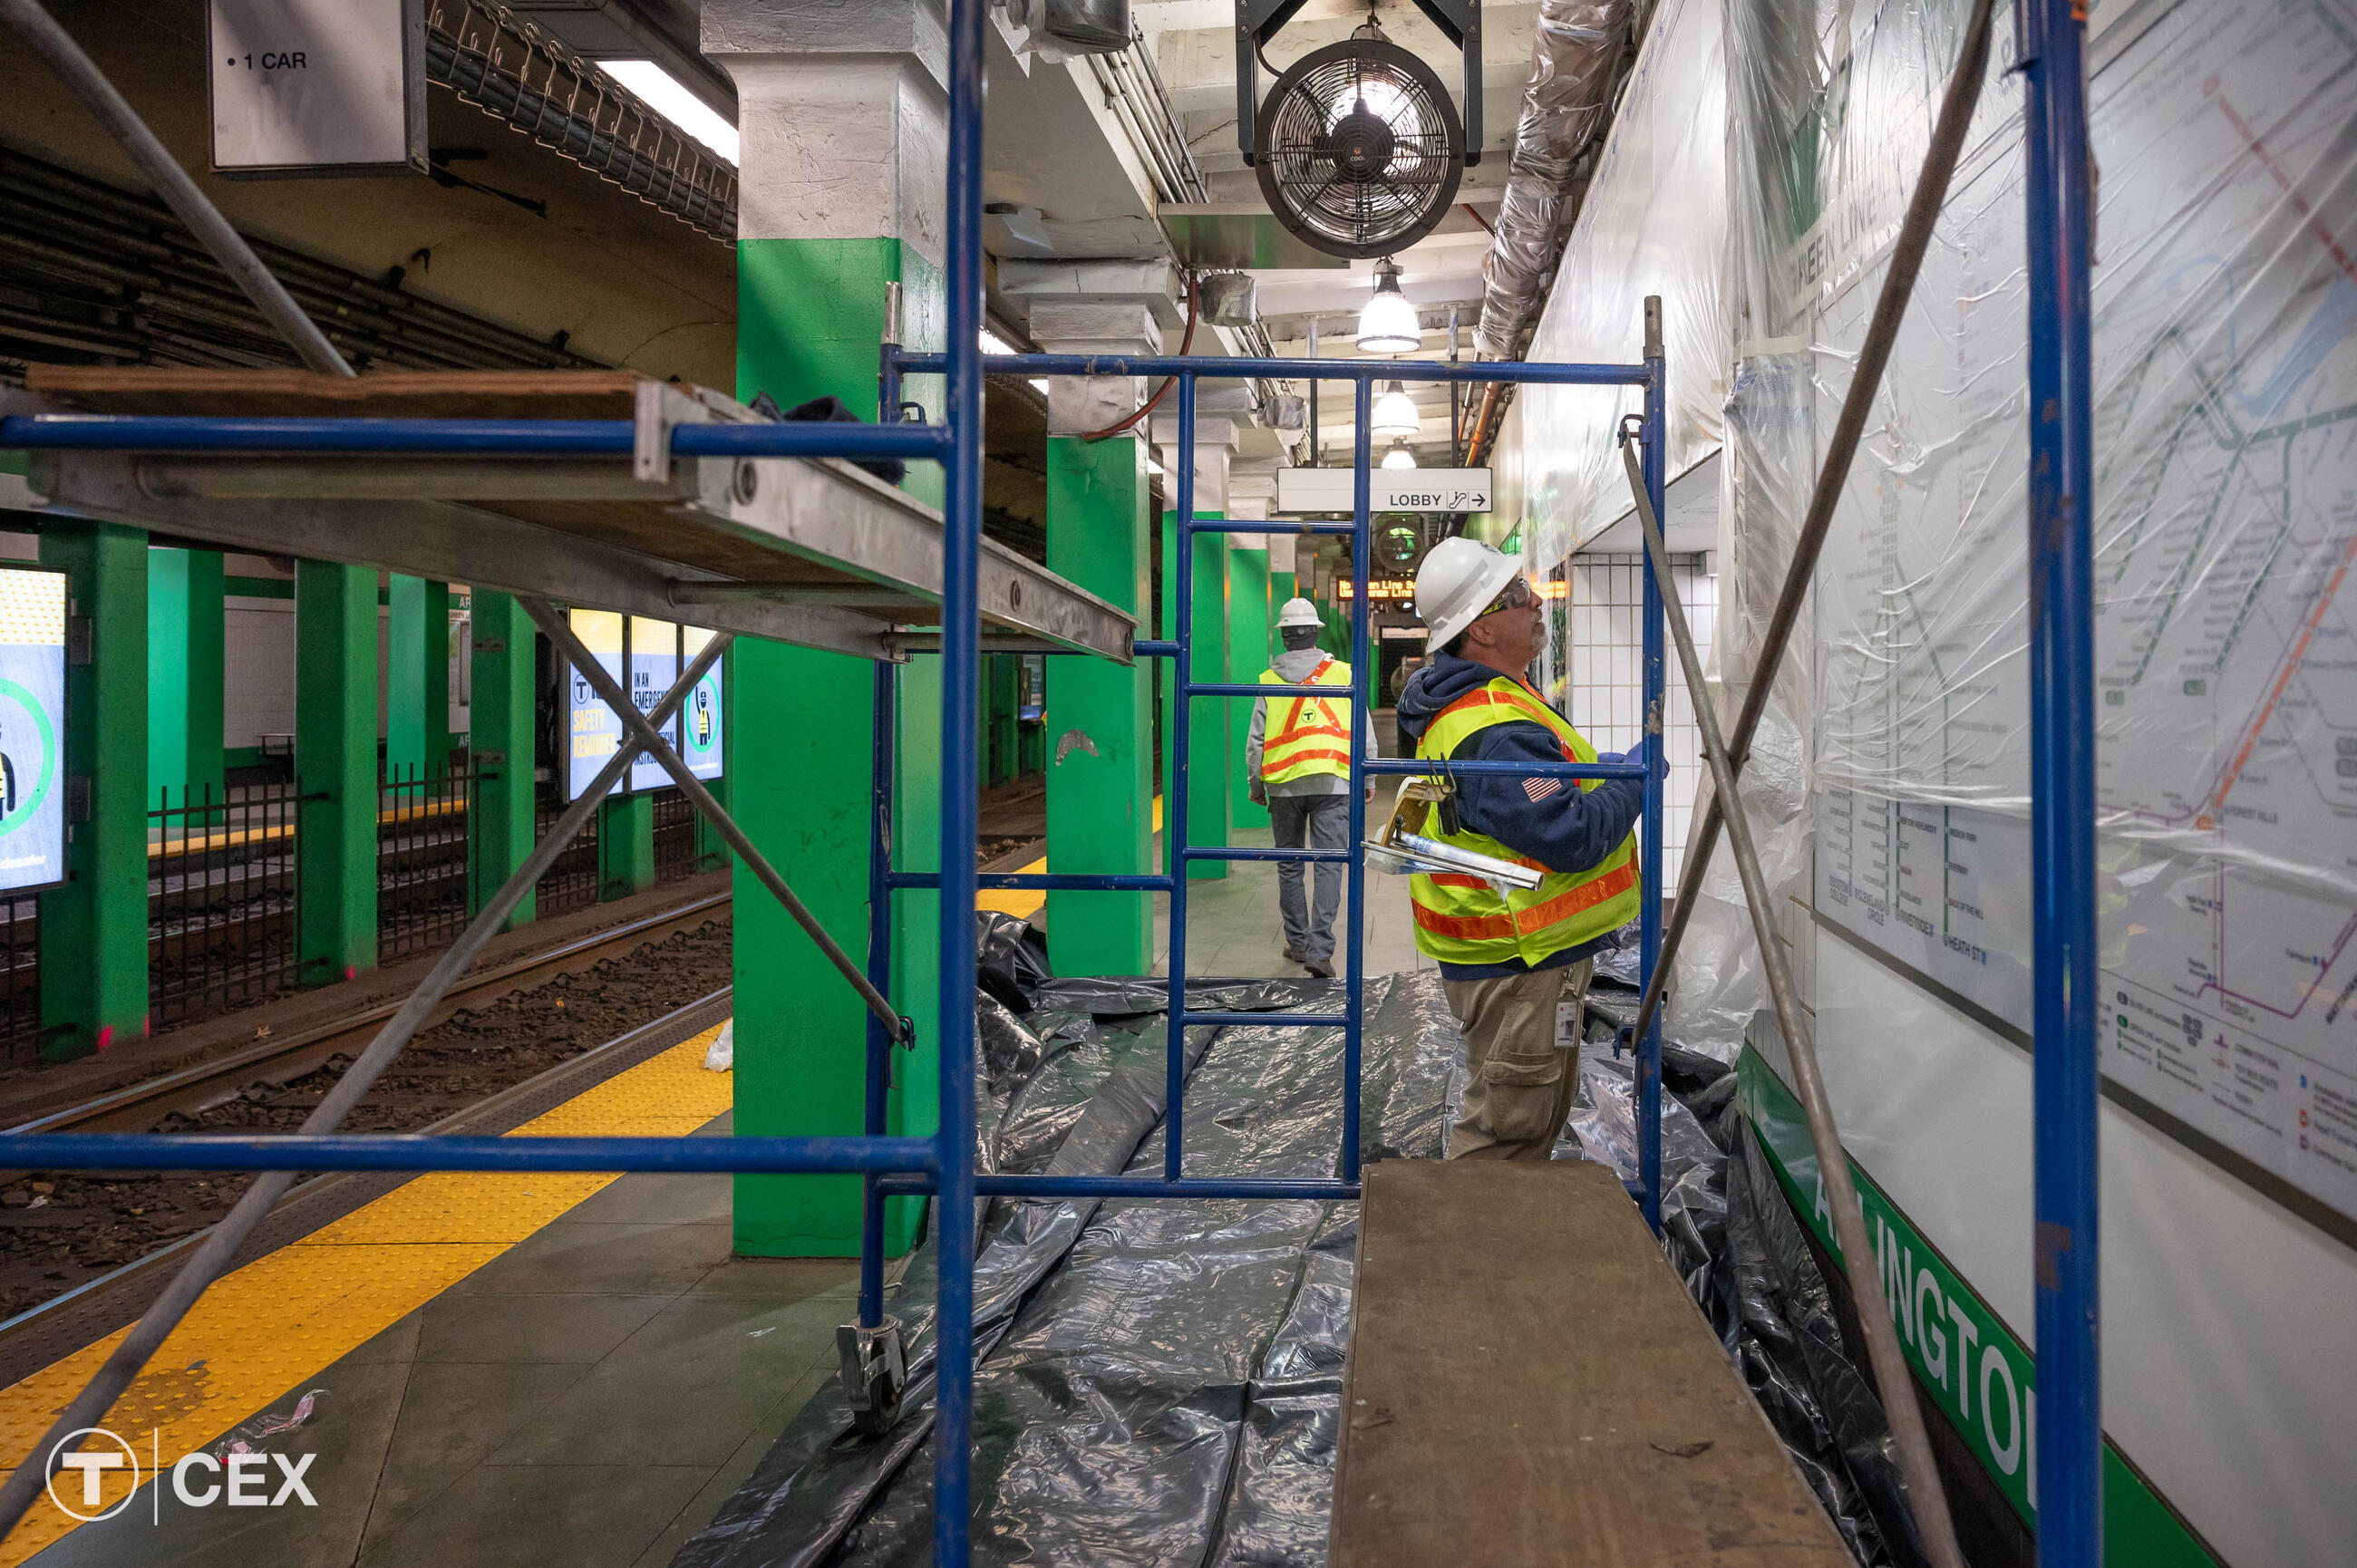 Crews performed a variety of in-station work during the recent shutdown in Green Line service, including at Arlington station.